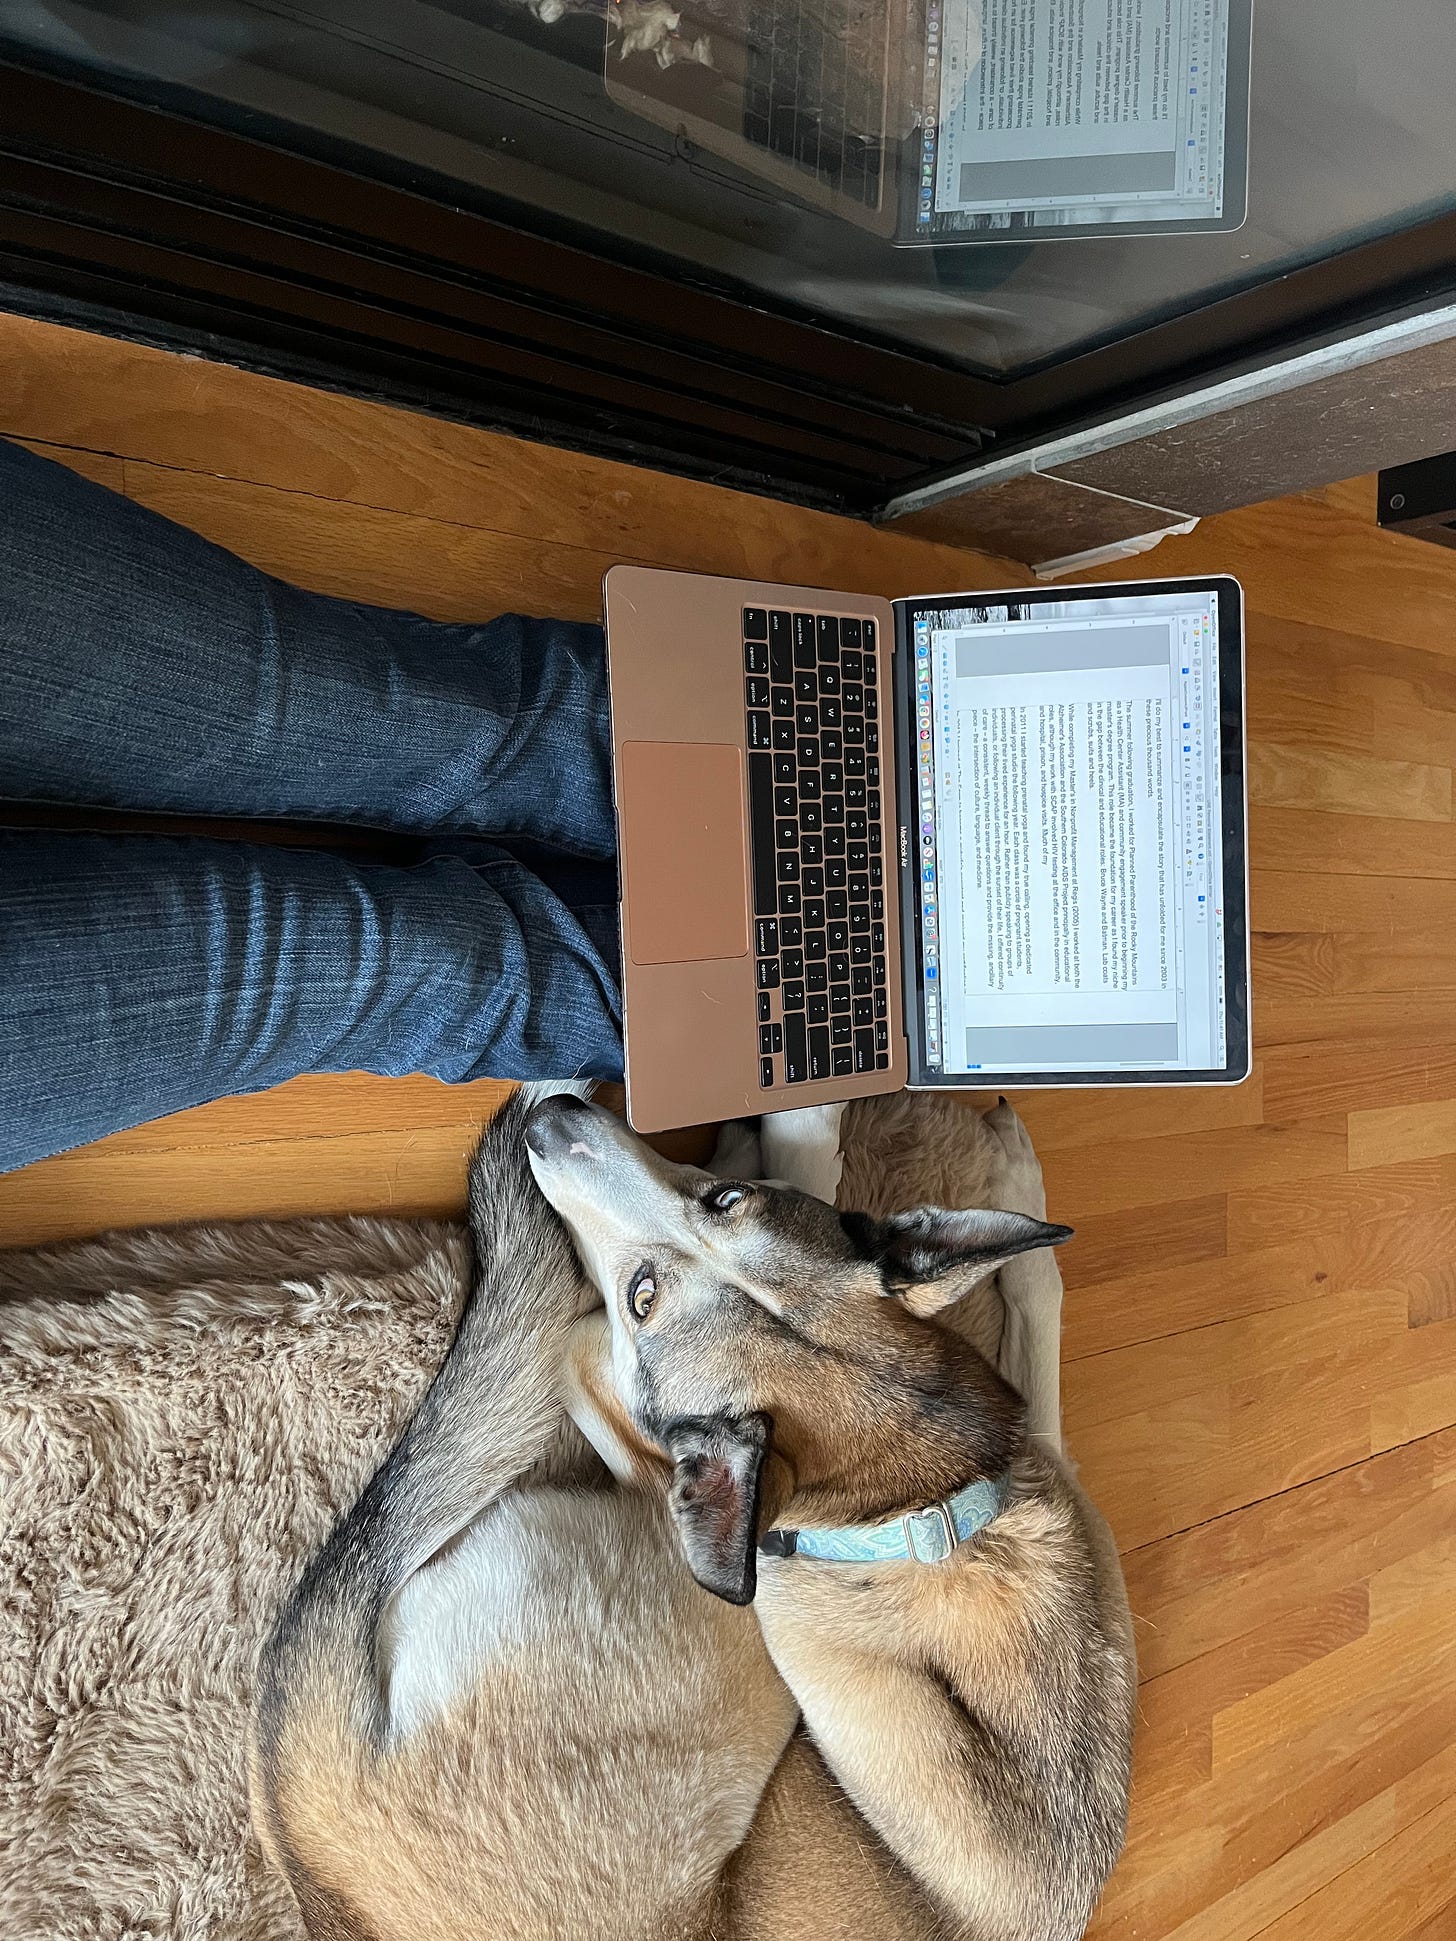 image of the author's jean-clad legs sitting on the wood floor. laptop balanced below her knees with Dakota the coyote dog looking up at her